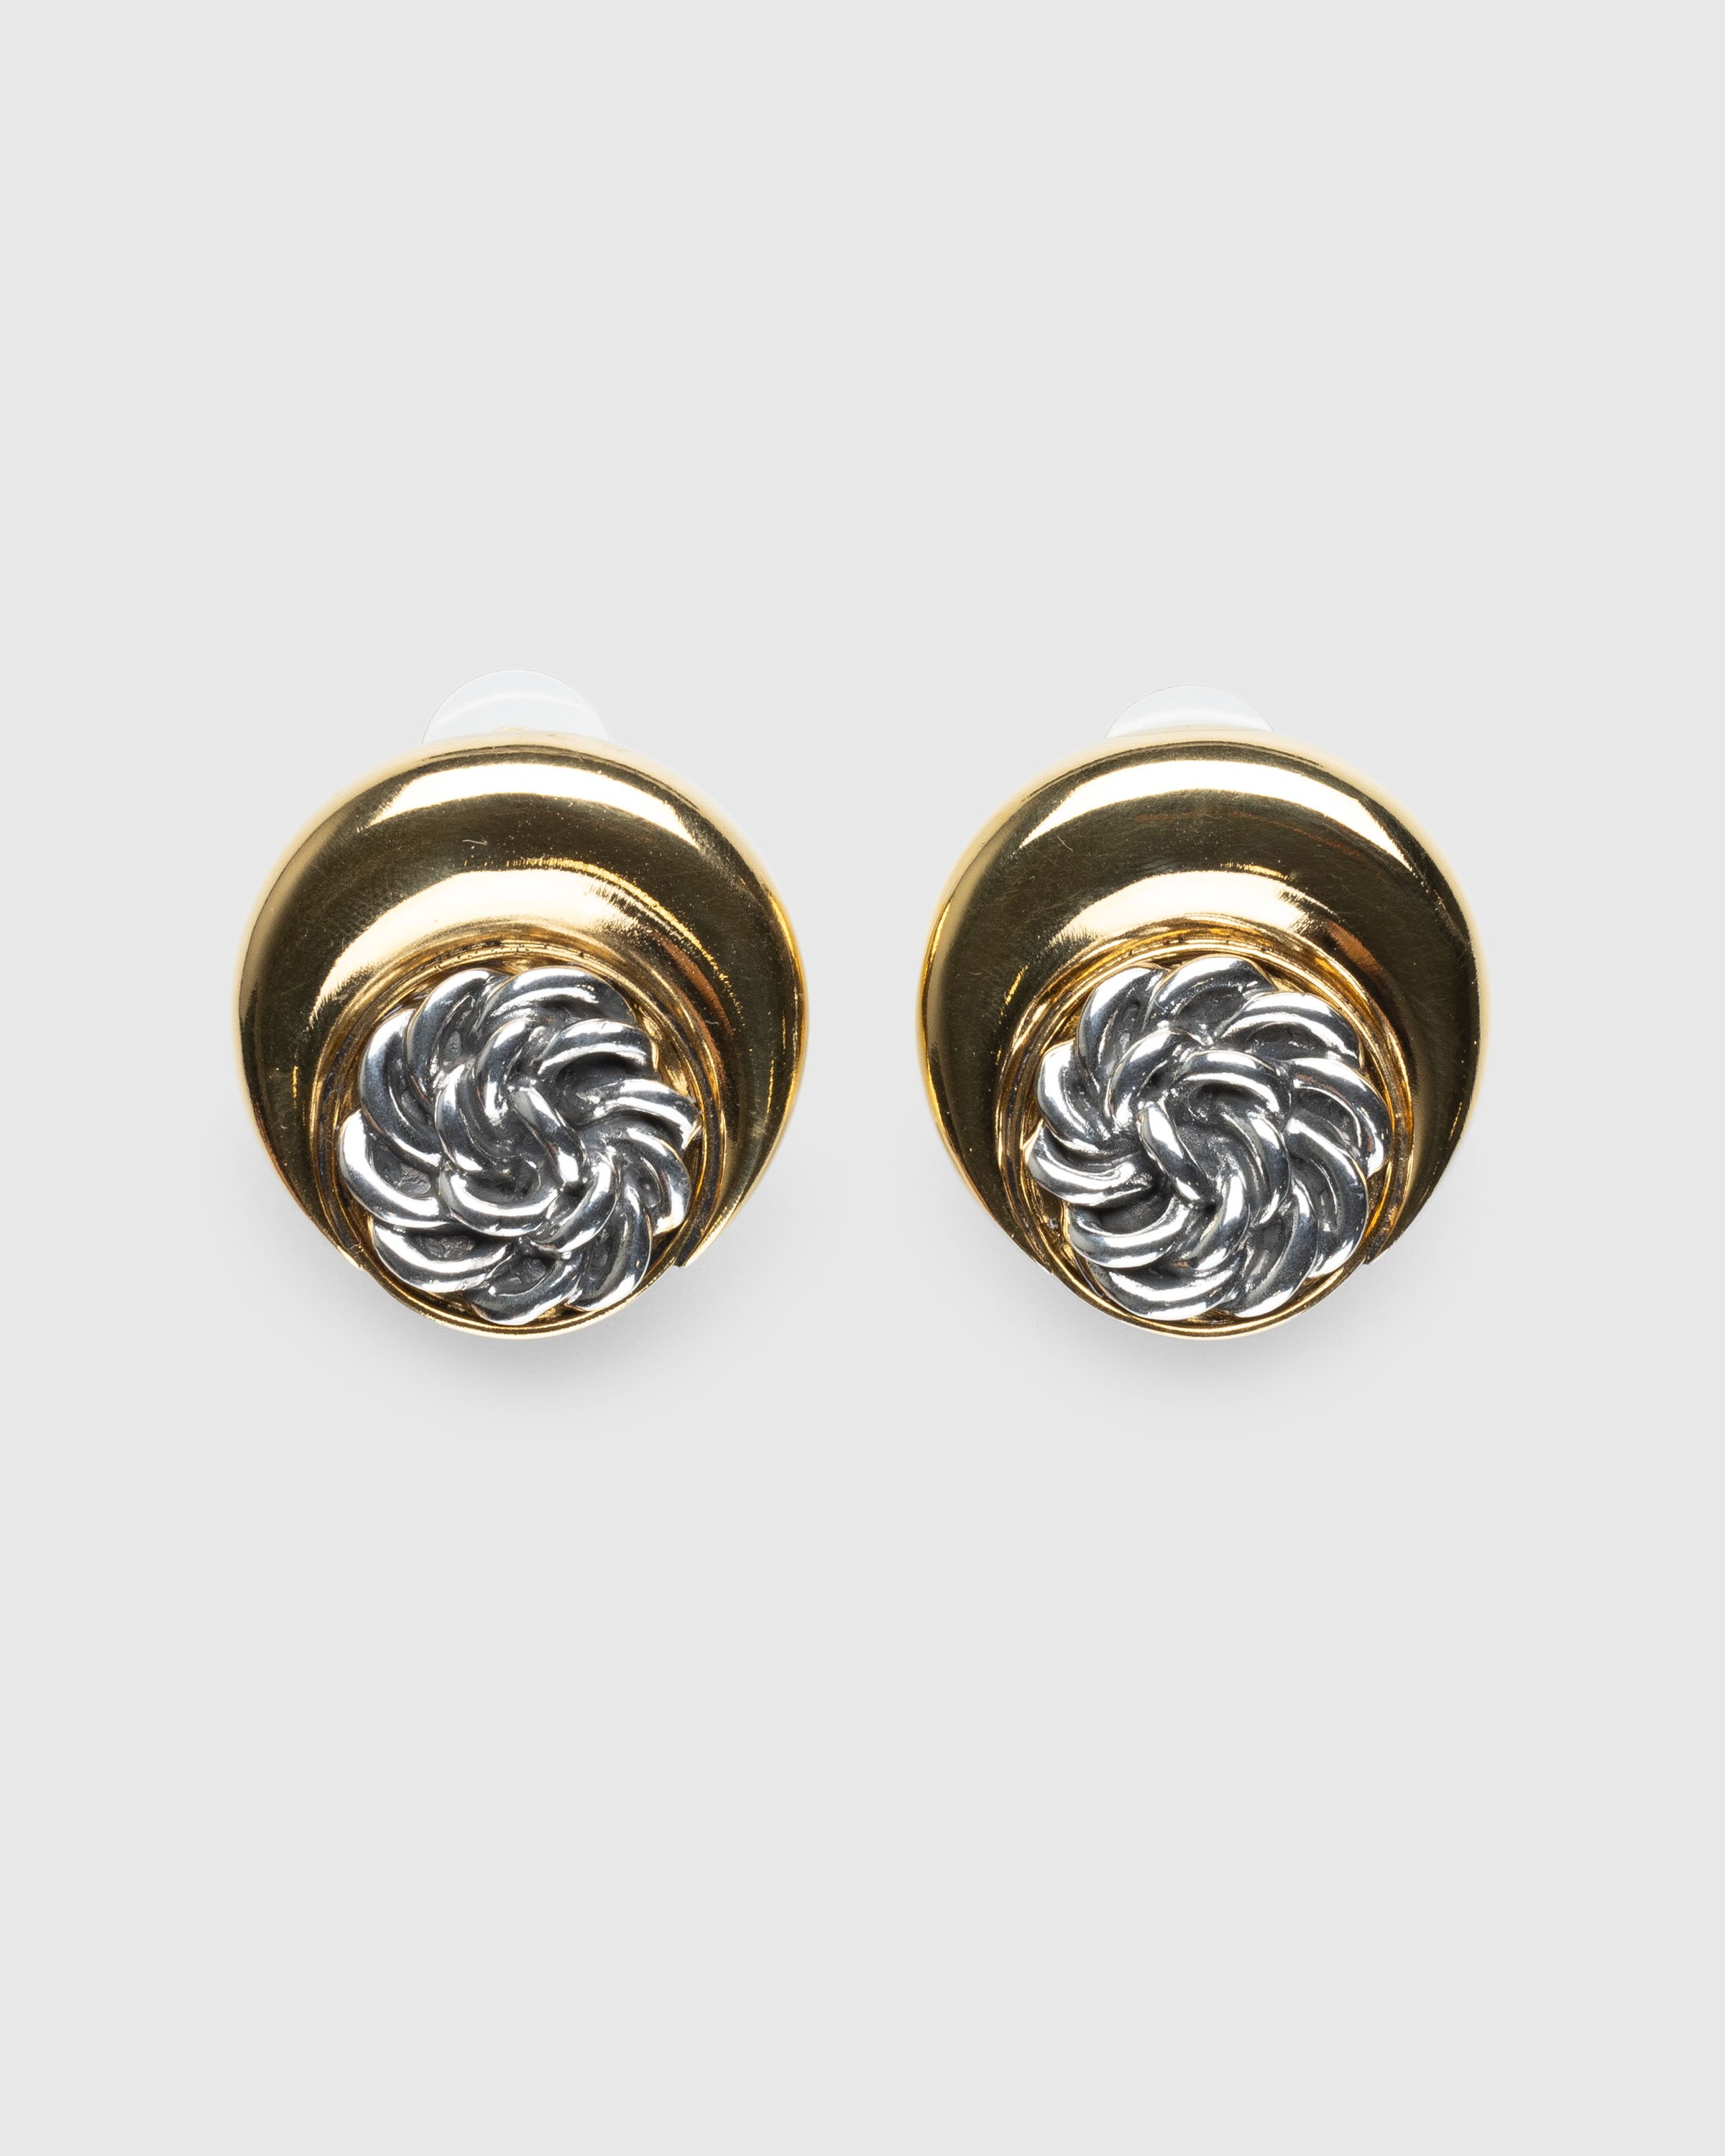 Marine Serre - Regenerated Buttons Moon Earrings Gold - Accessories - Gold - Image 1